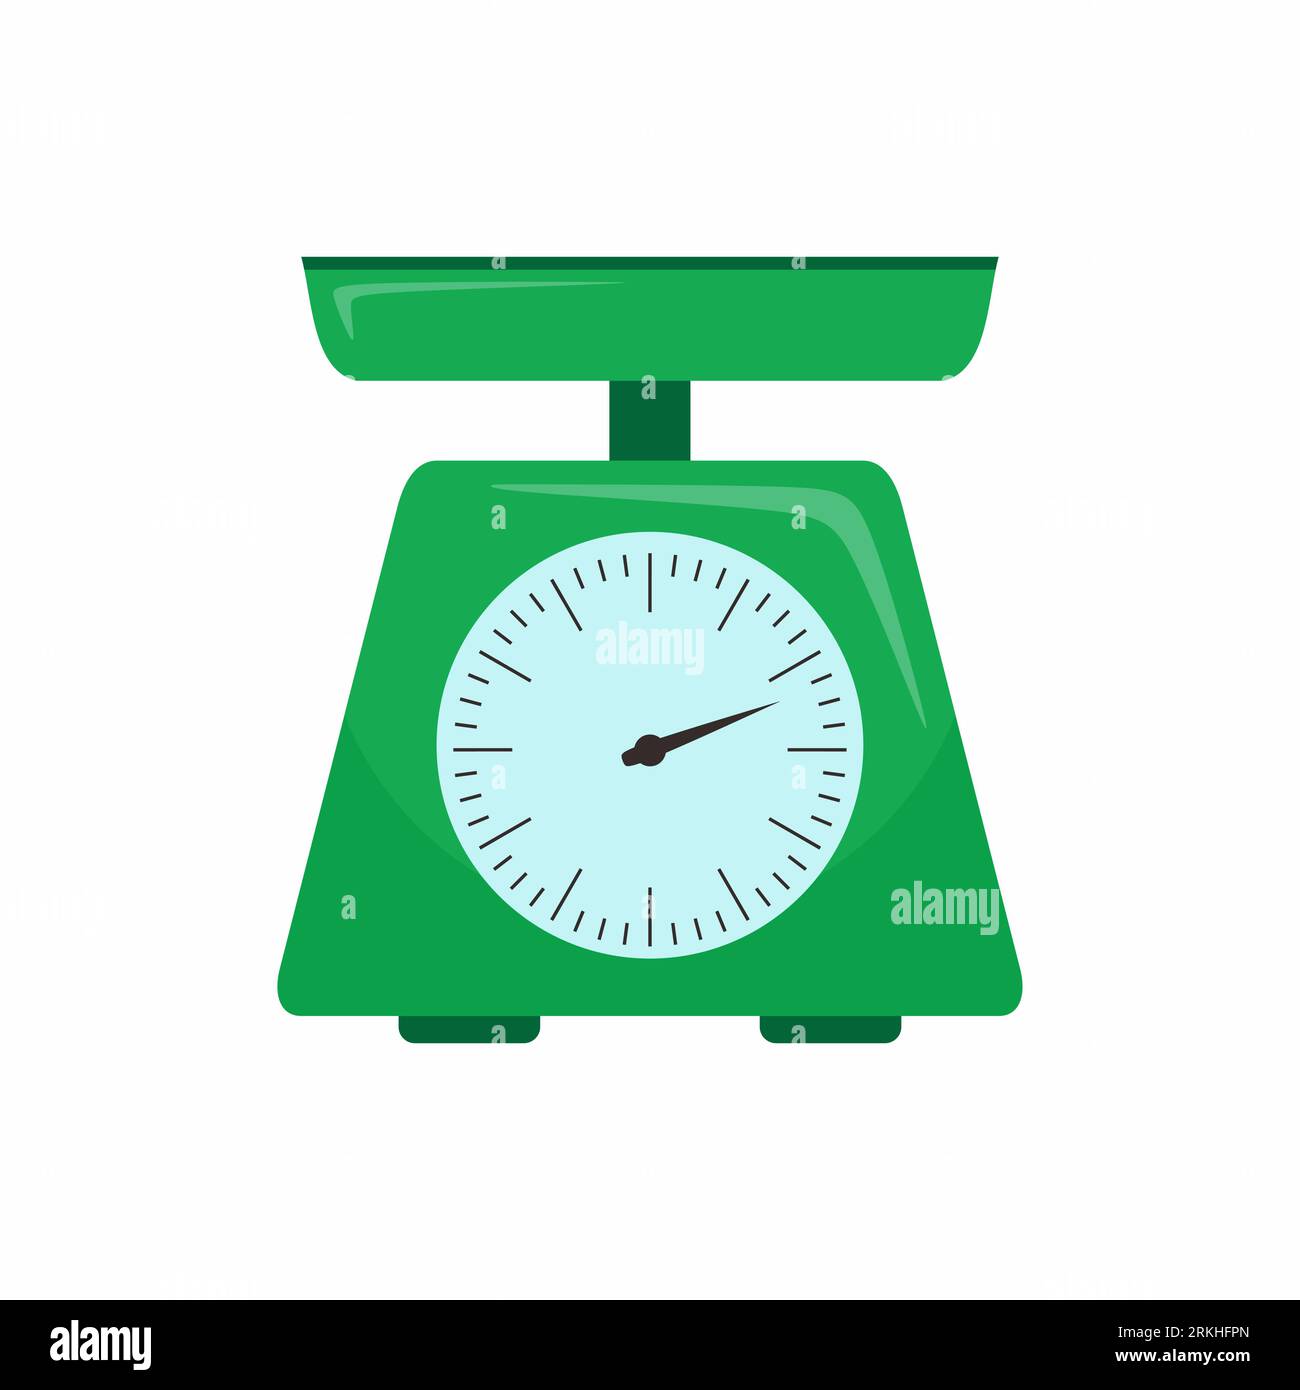 Analog Weight Scale Cliparts, Stock Vector and Royalty Free Analog Weight  Scale Illustrations